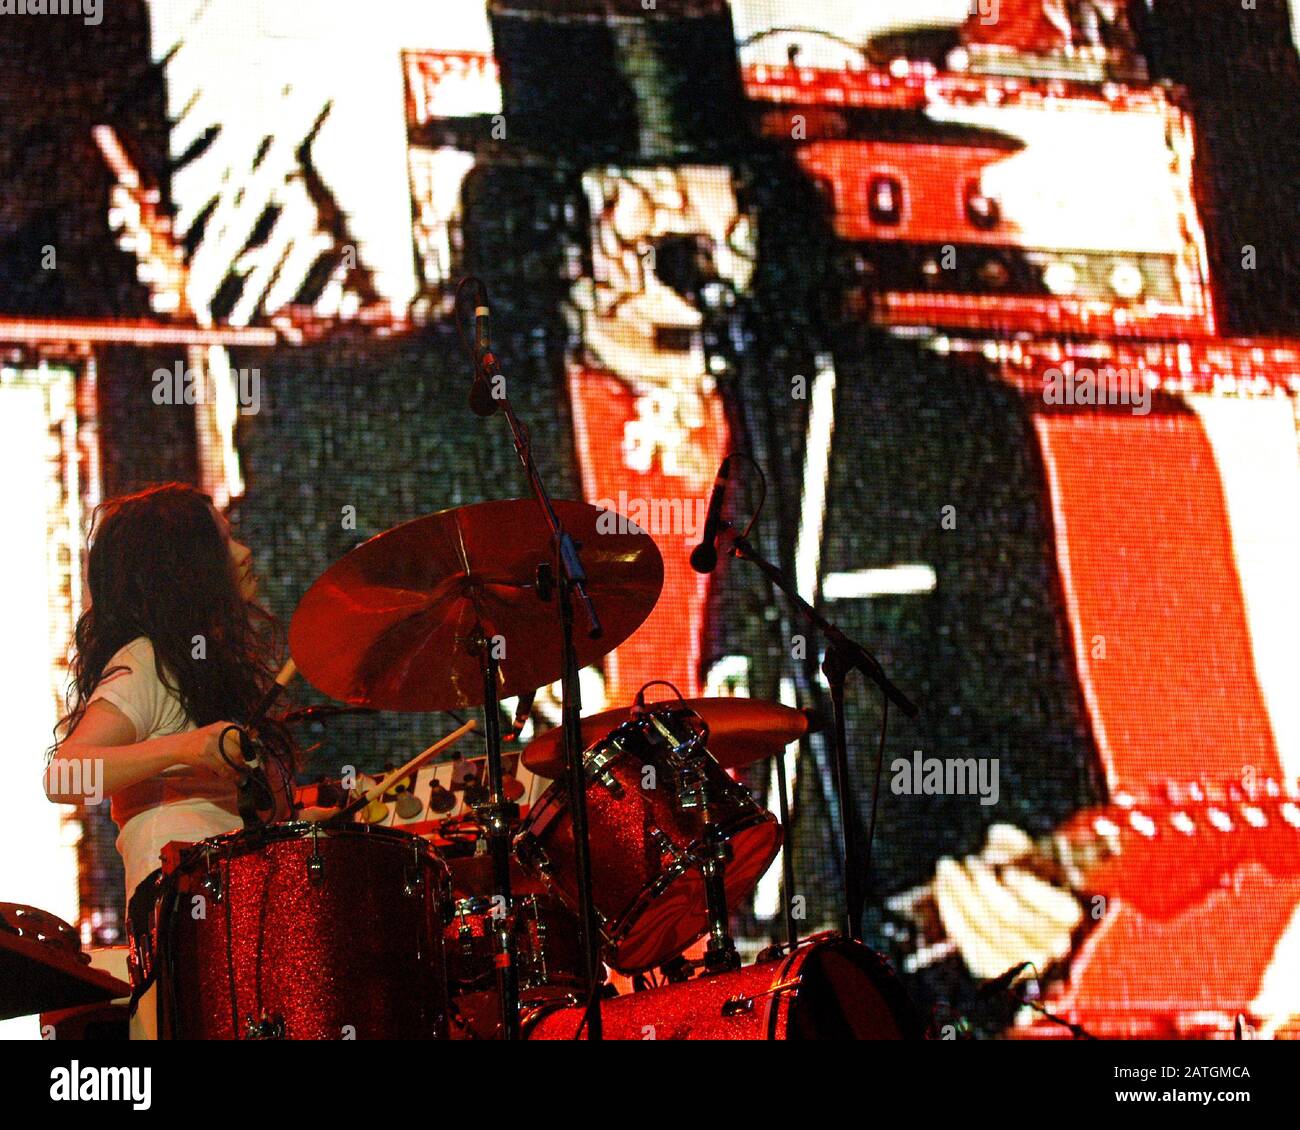 JUNE 10: Meg White and Jack White of The White Stripes open their Get Behind Me Satan Tour with a headlining performance on the first night of Atlanta's Music Midtown Festival on June 10, 2005. CREDIT: Chris McKay / MediaPunch Stock Photo